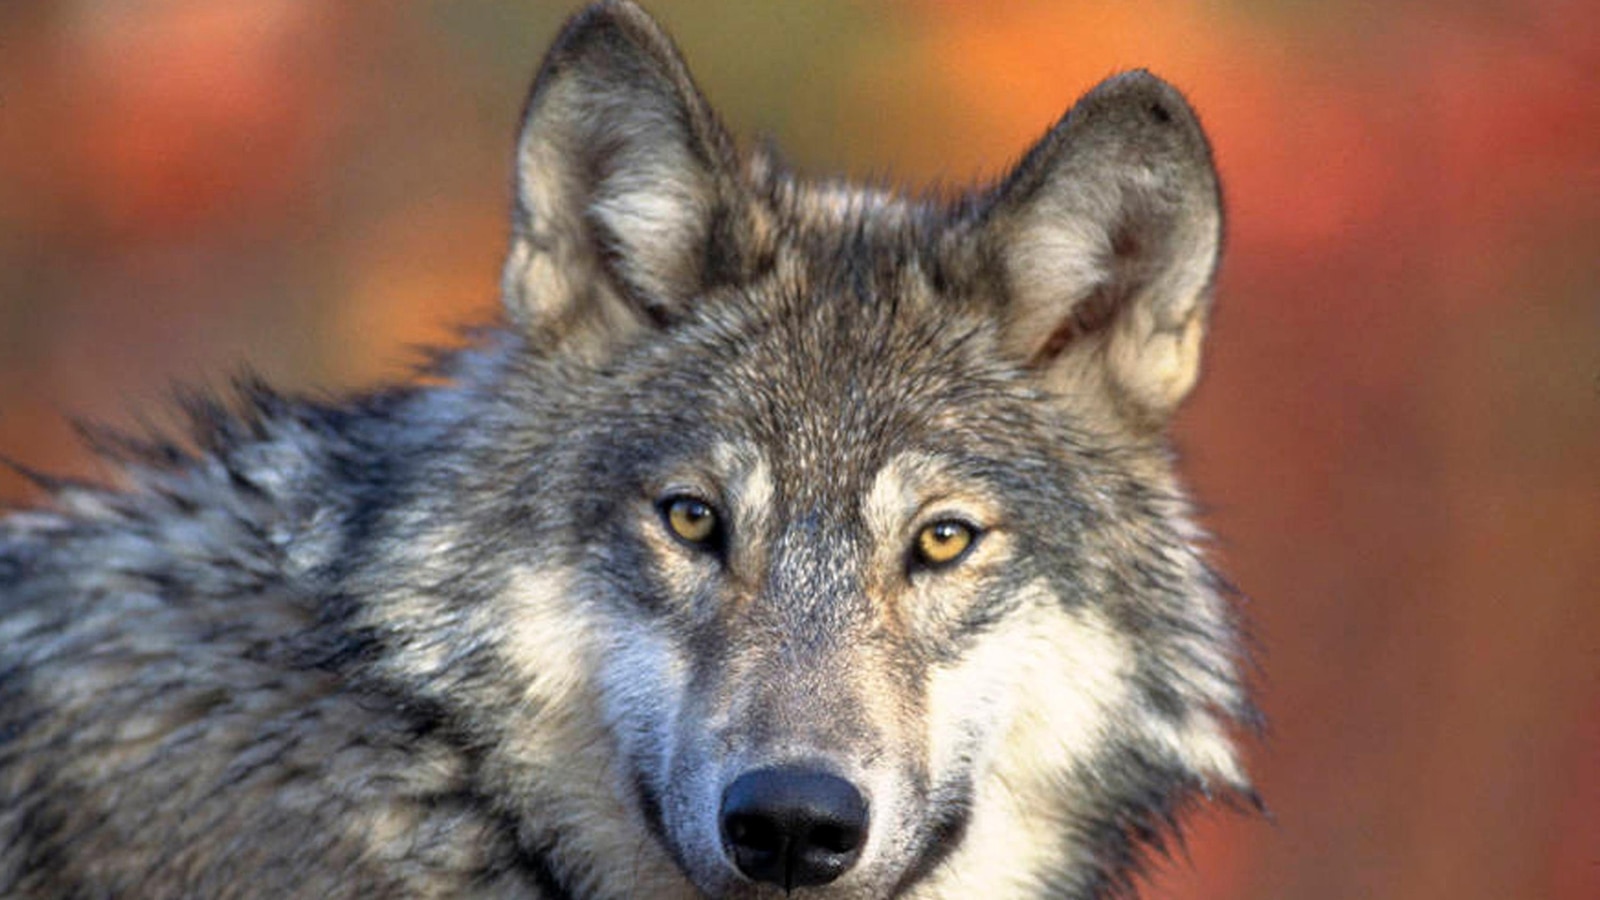 Reward of $50,000 available for any information regarding the deaths of 3 endangered gray wolves in Oregon